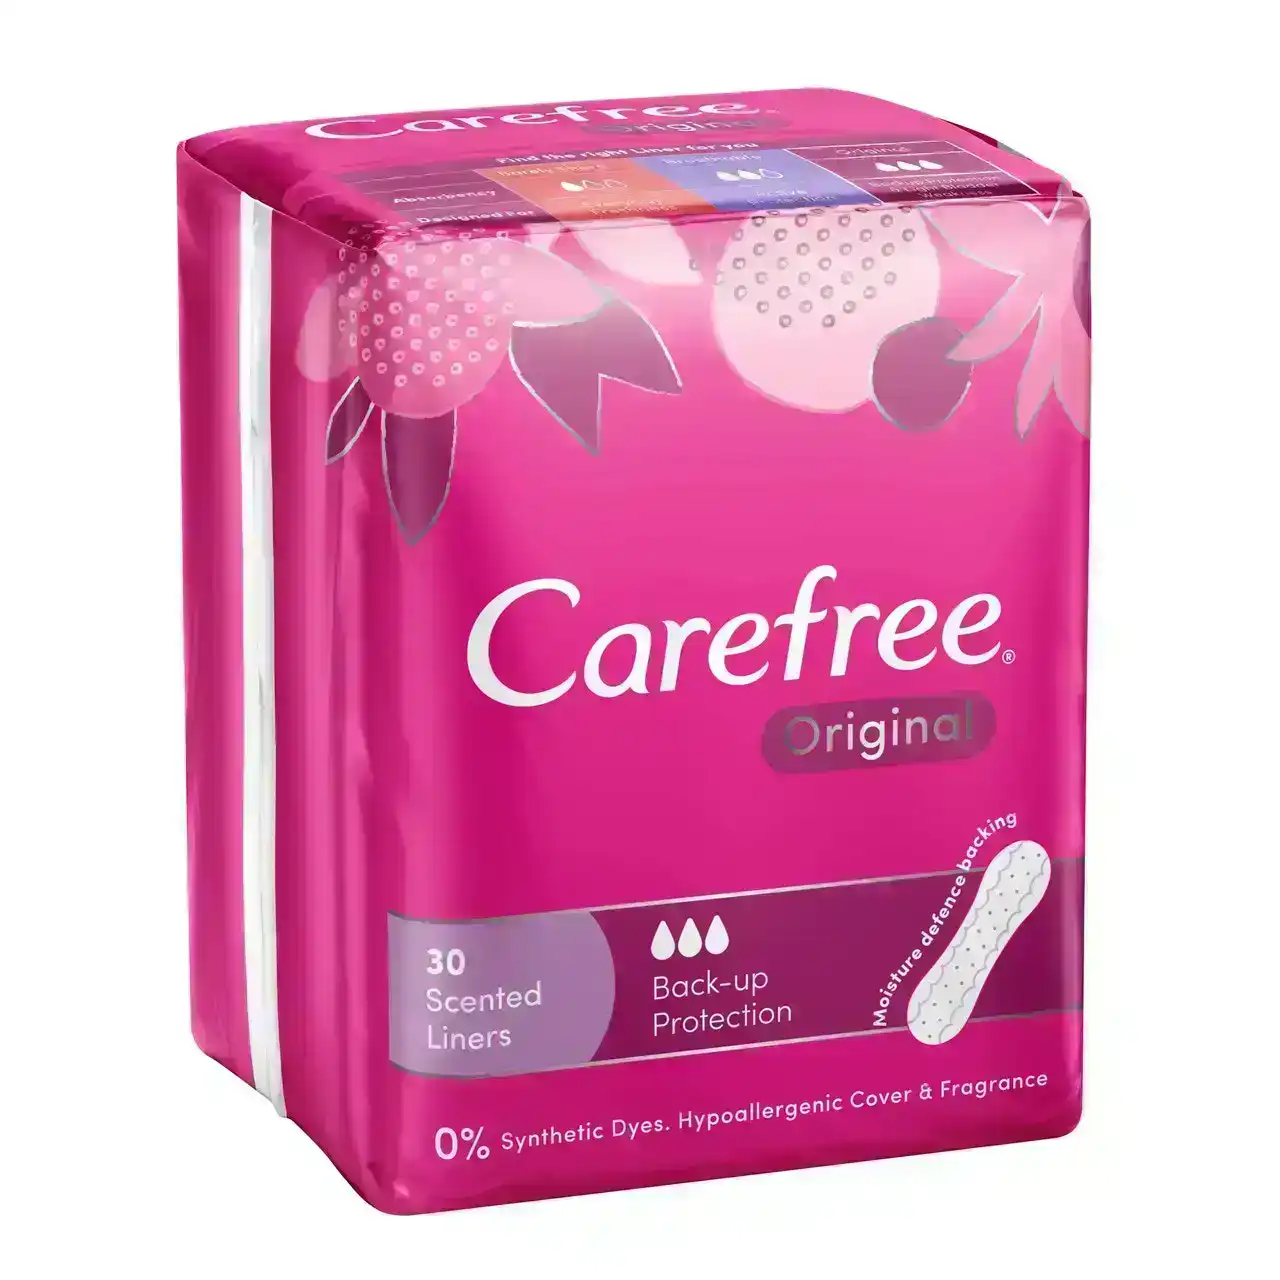 Carefree Original Scented Panty Liners 30 pack